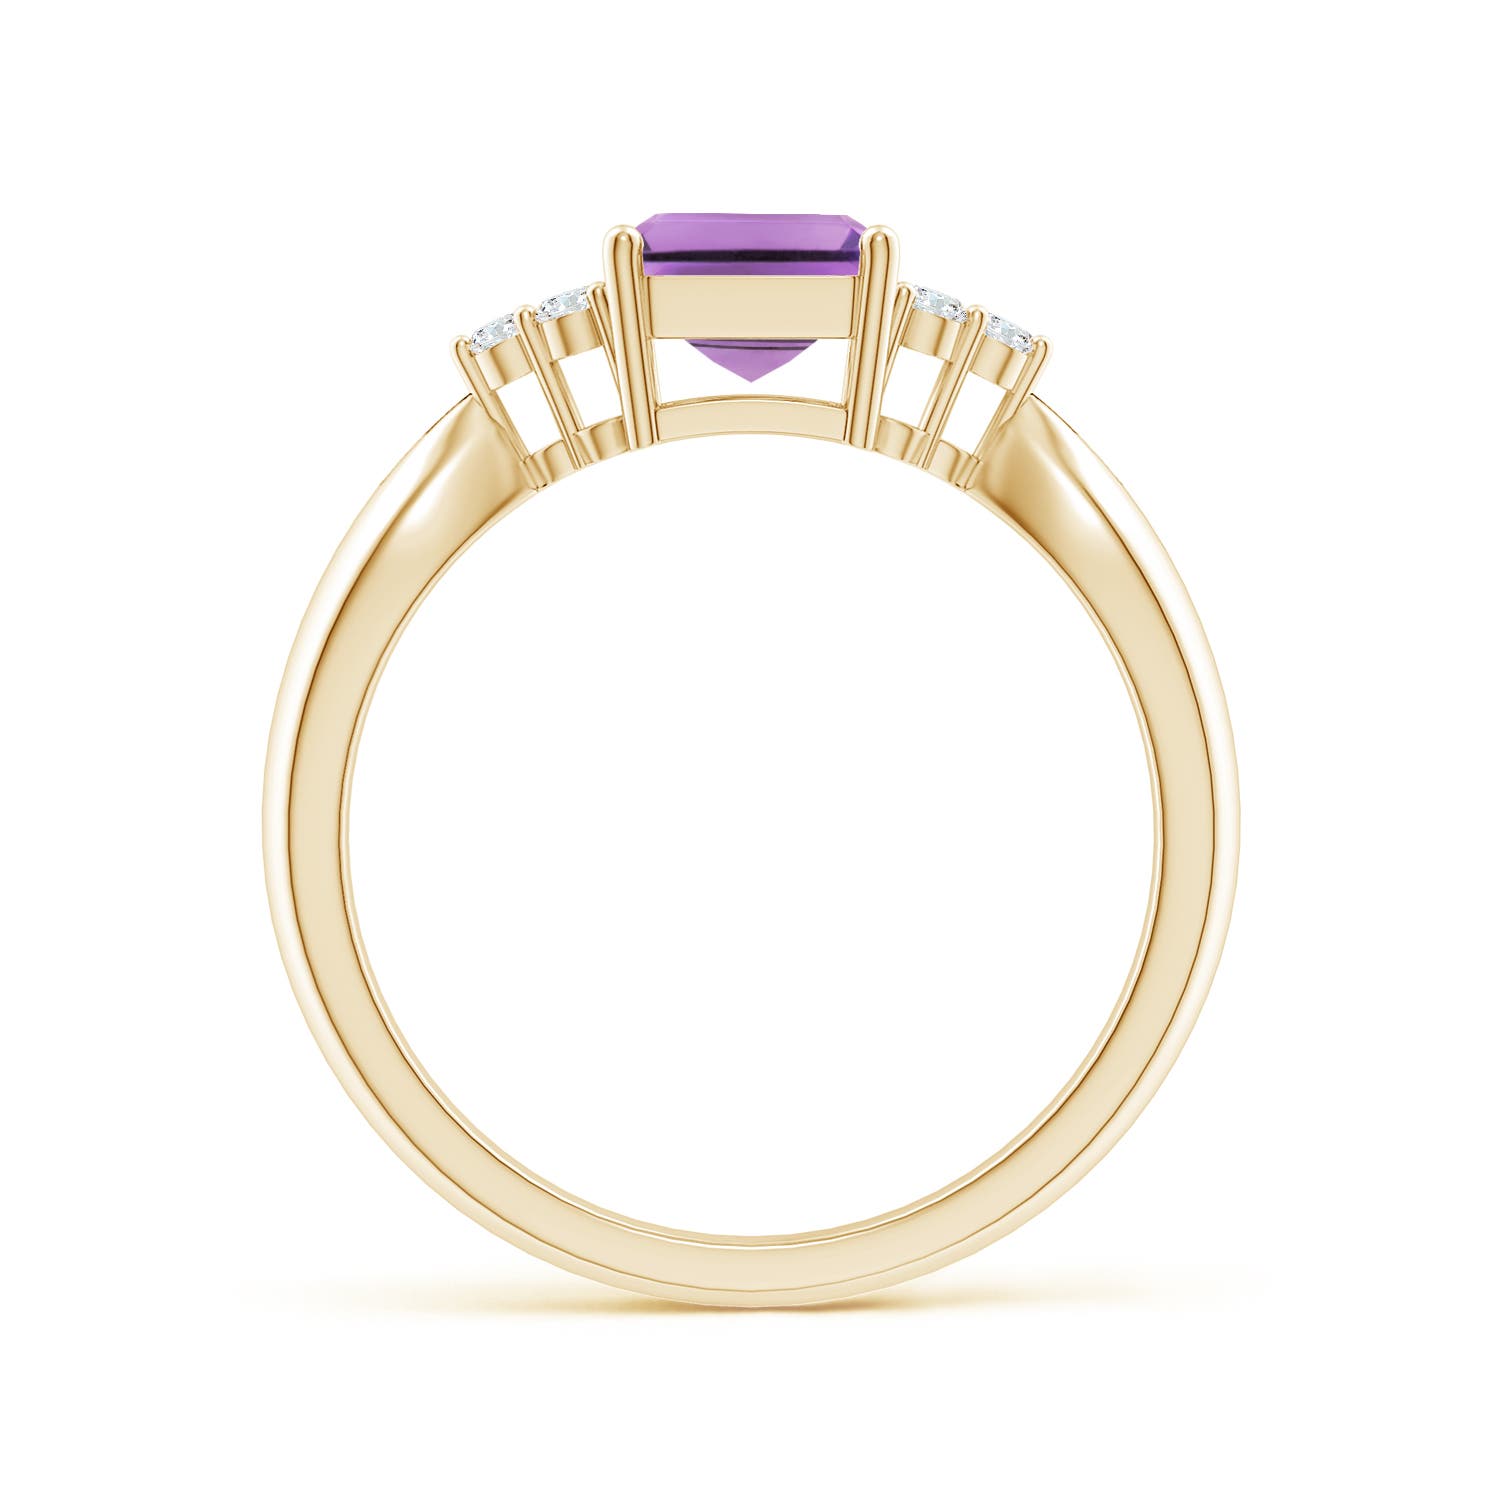 A - Amethyst / 1.67 CT / 14 KT Yellow Gold